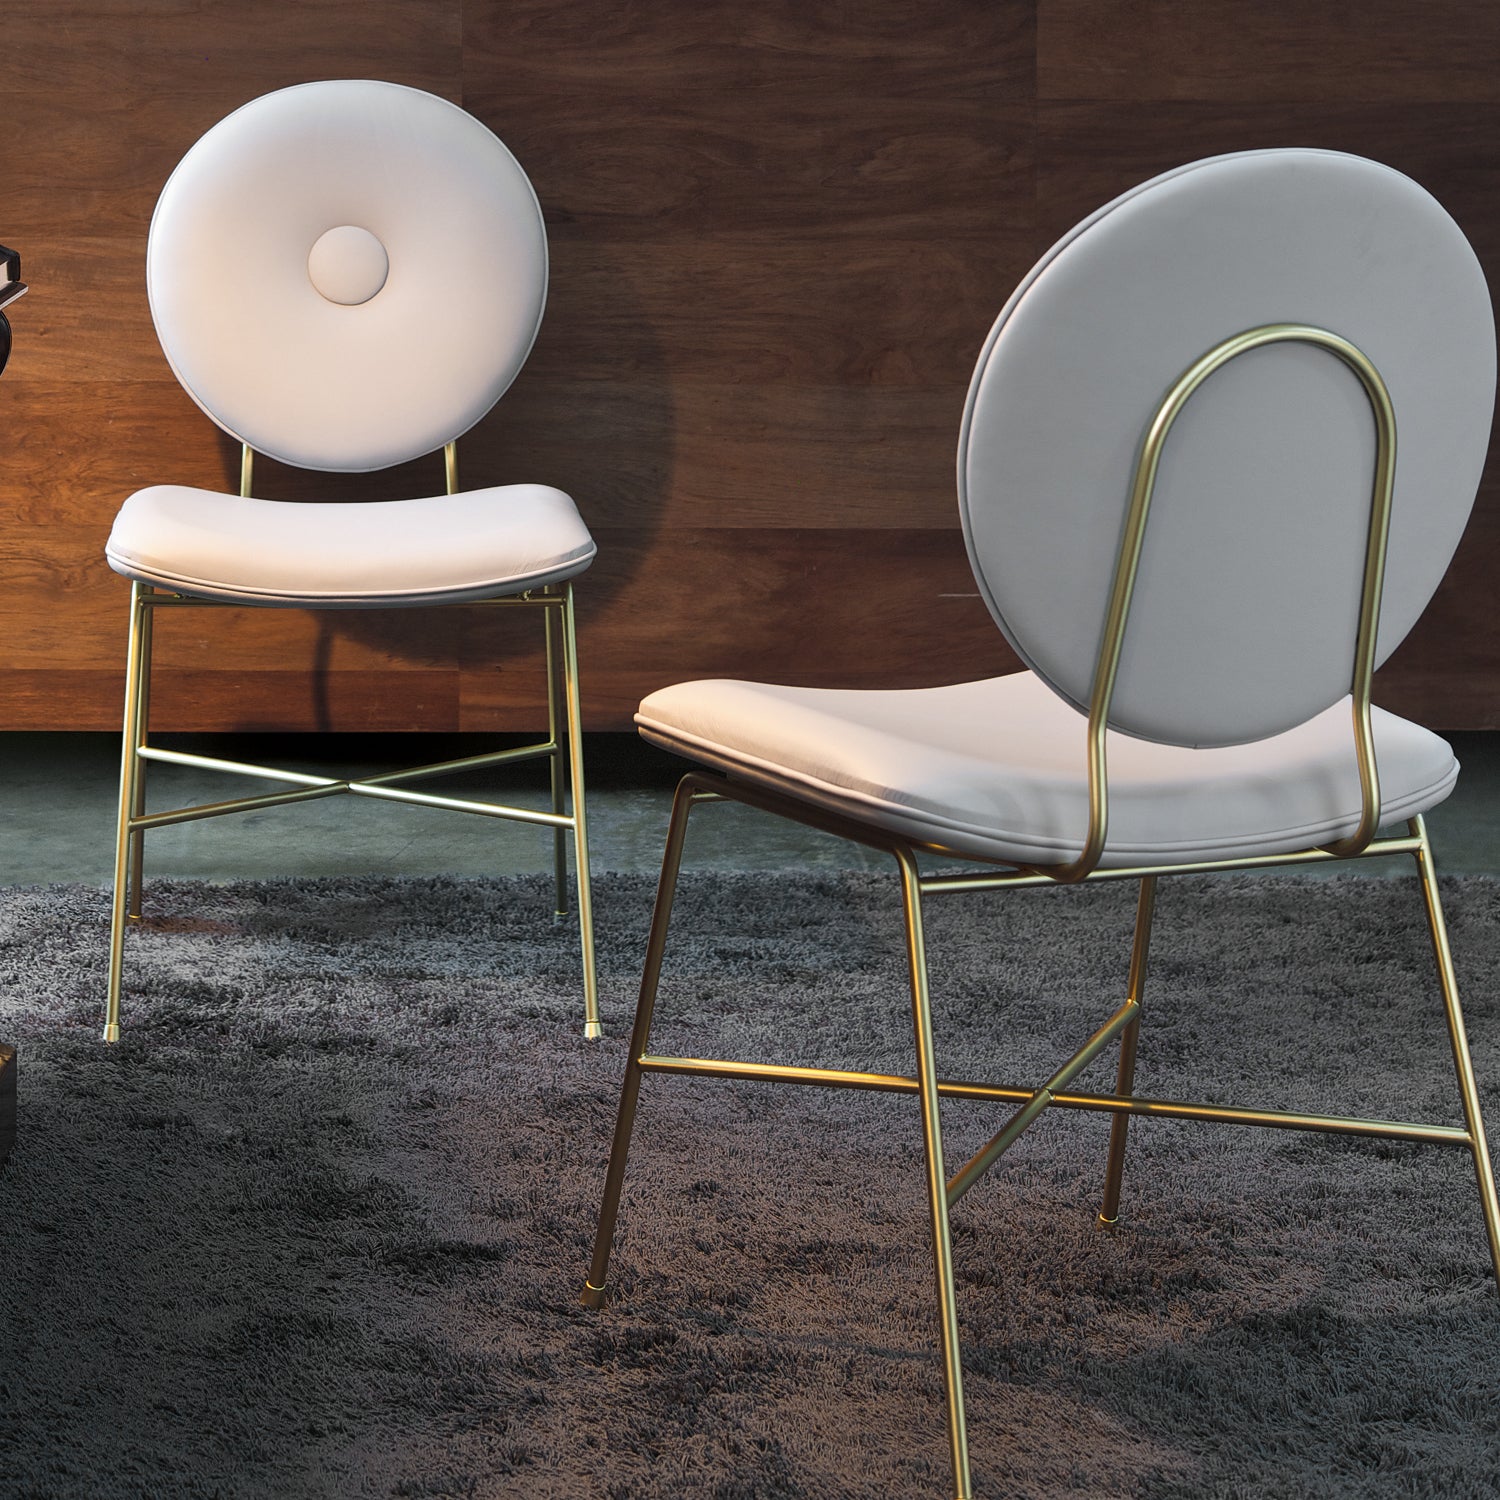 Penelope Chair In Ice White Leather By Bontempi Casa